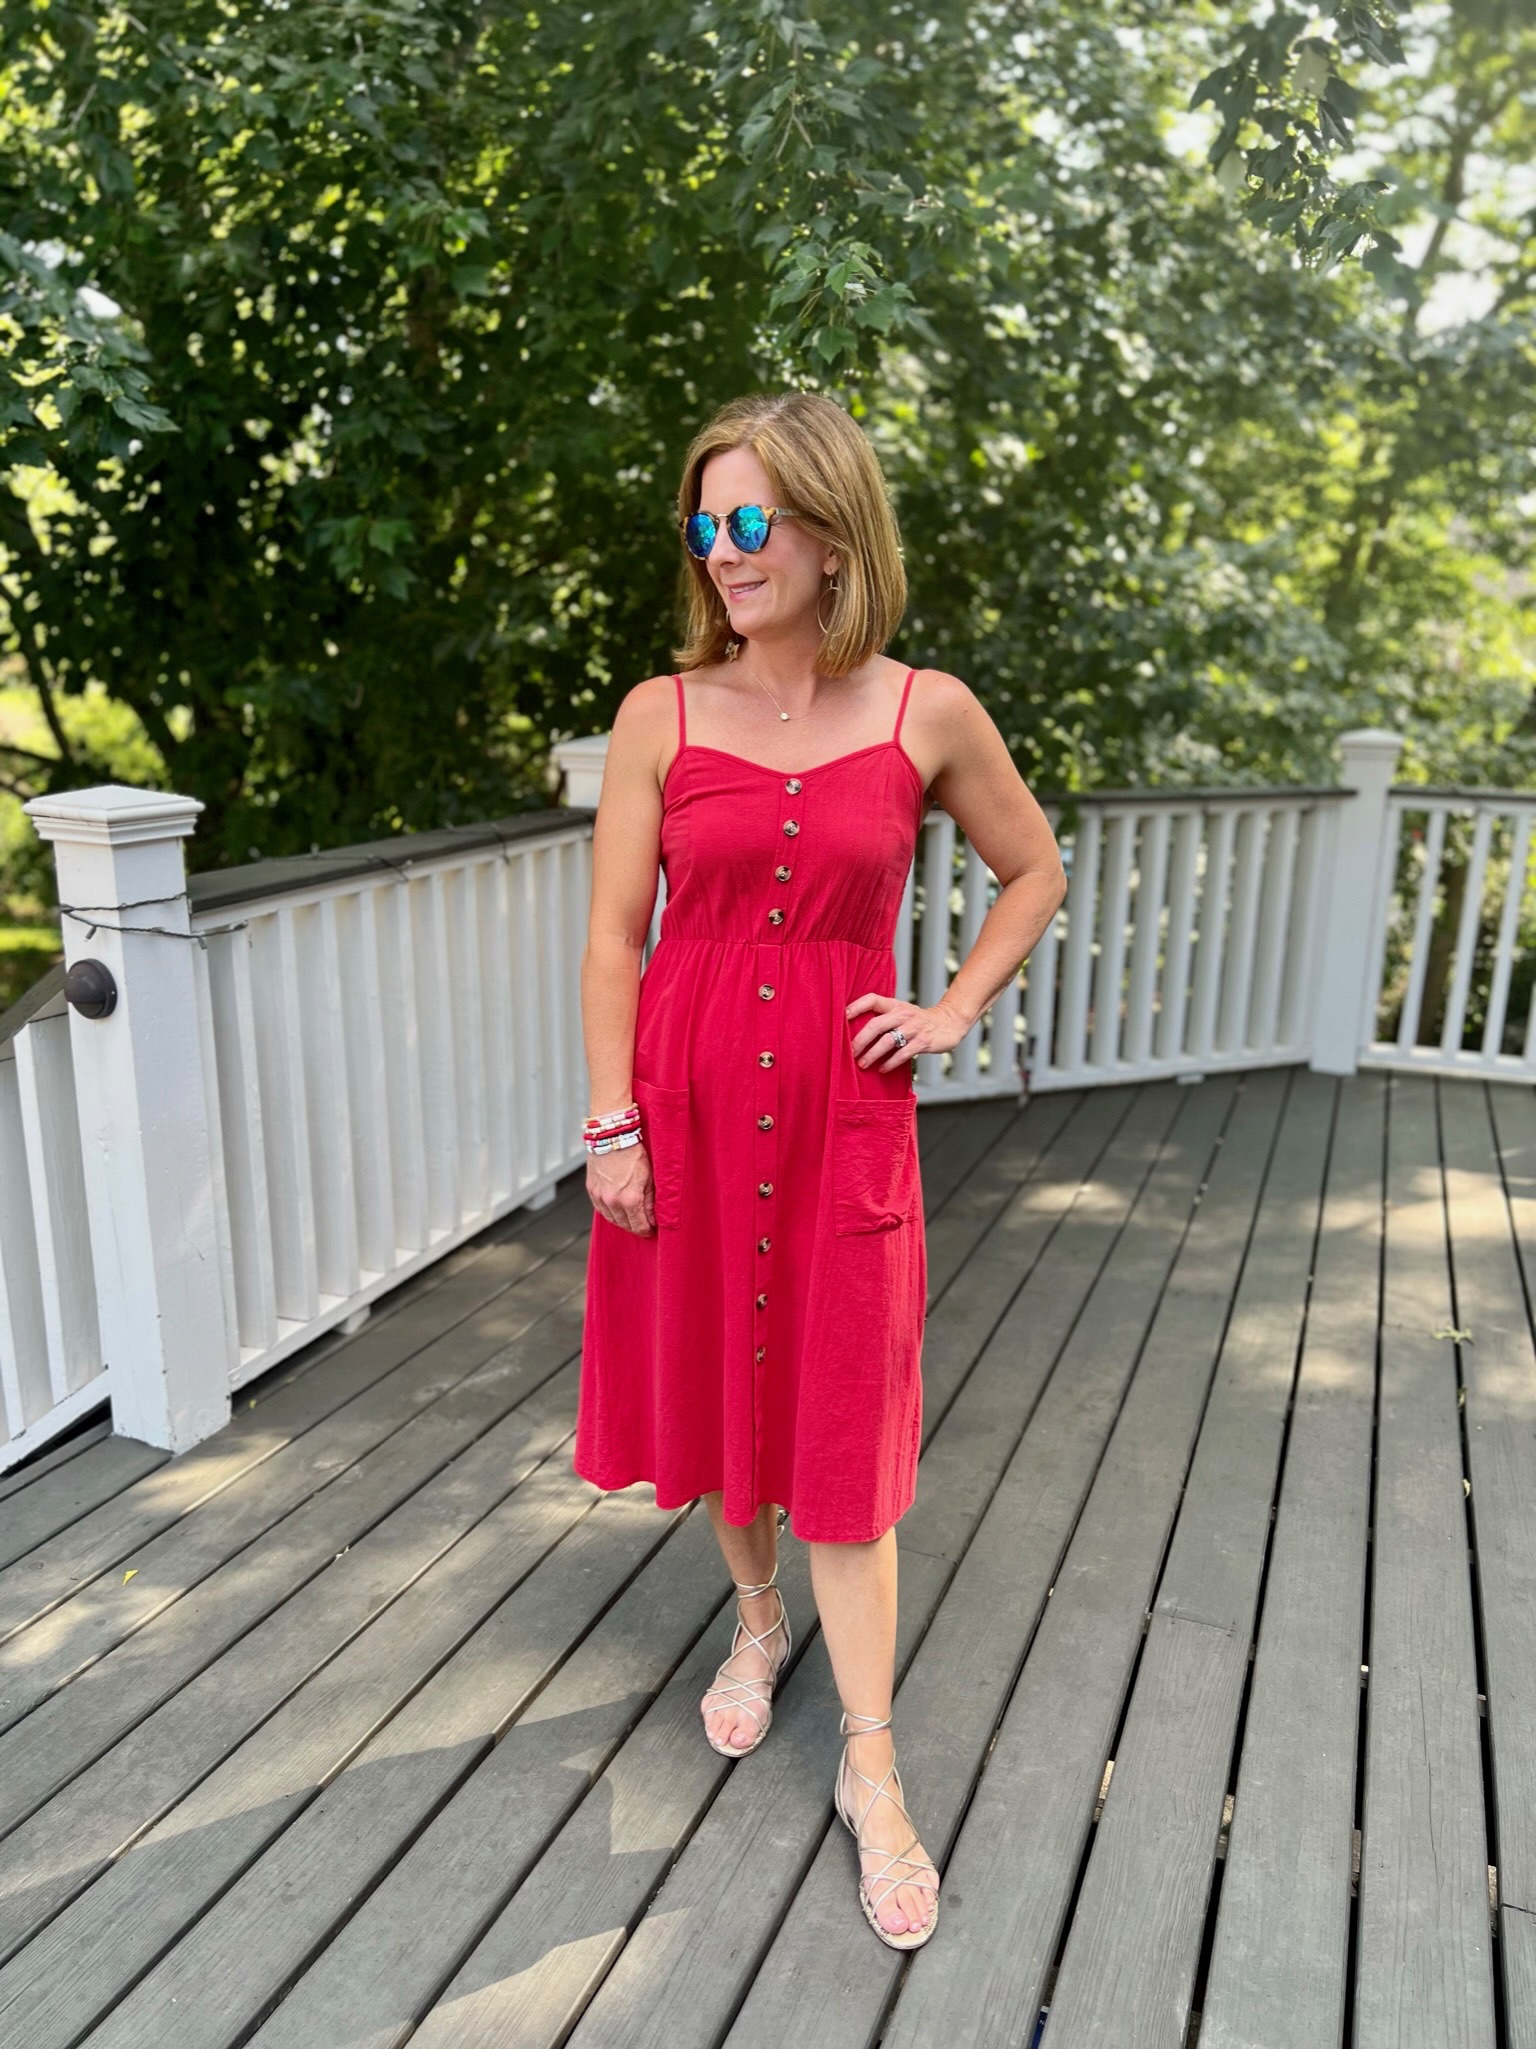 5 Easy Tips To Look Stylish This Summer Spaghetti Strap Sundress how to accessorize a sundress how to look cute quickly for summer simple summer style must have dresses for summer nashville stylists share summer style inspo